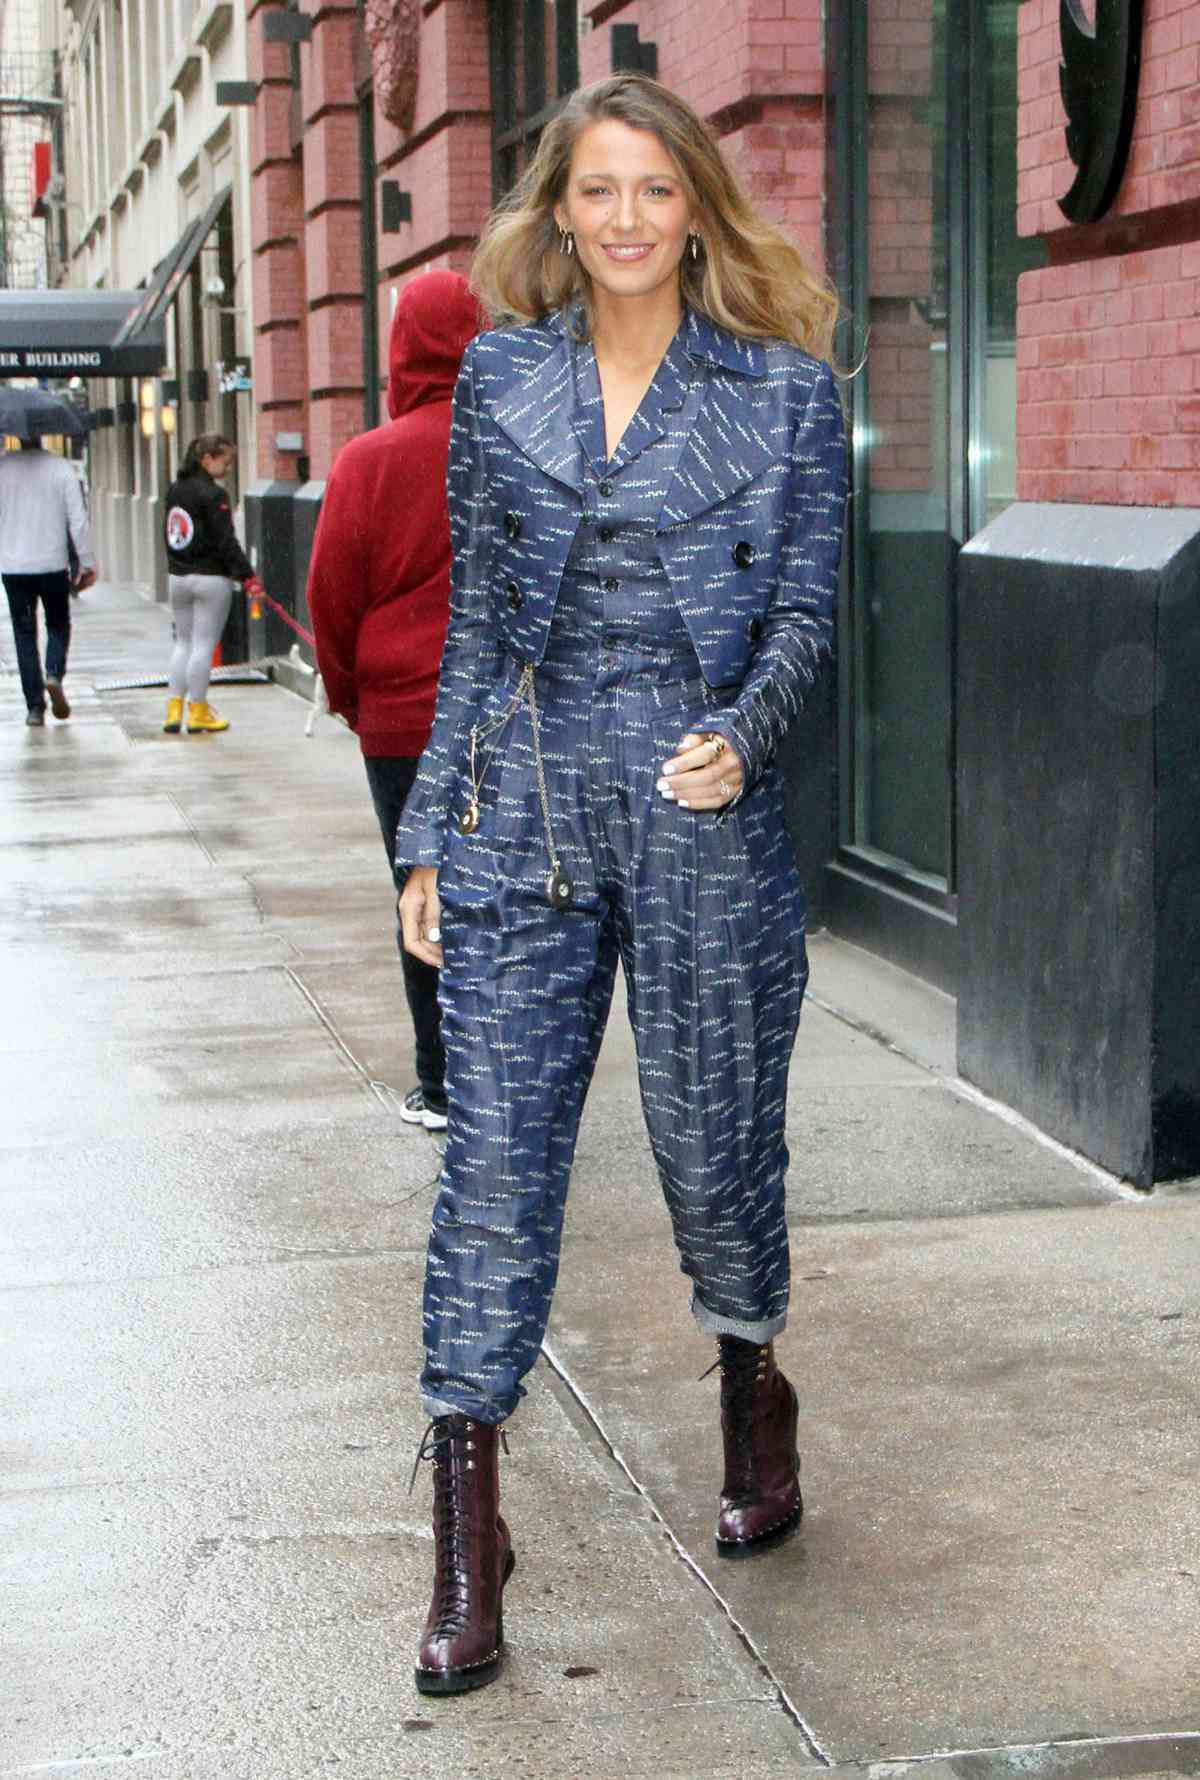 Blake Lively suits embed